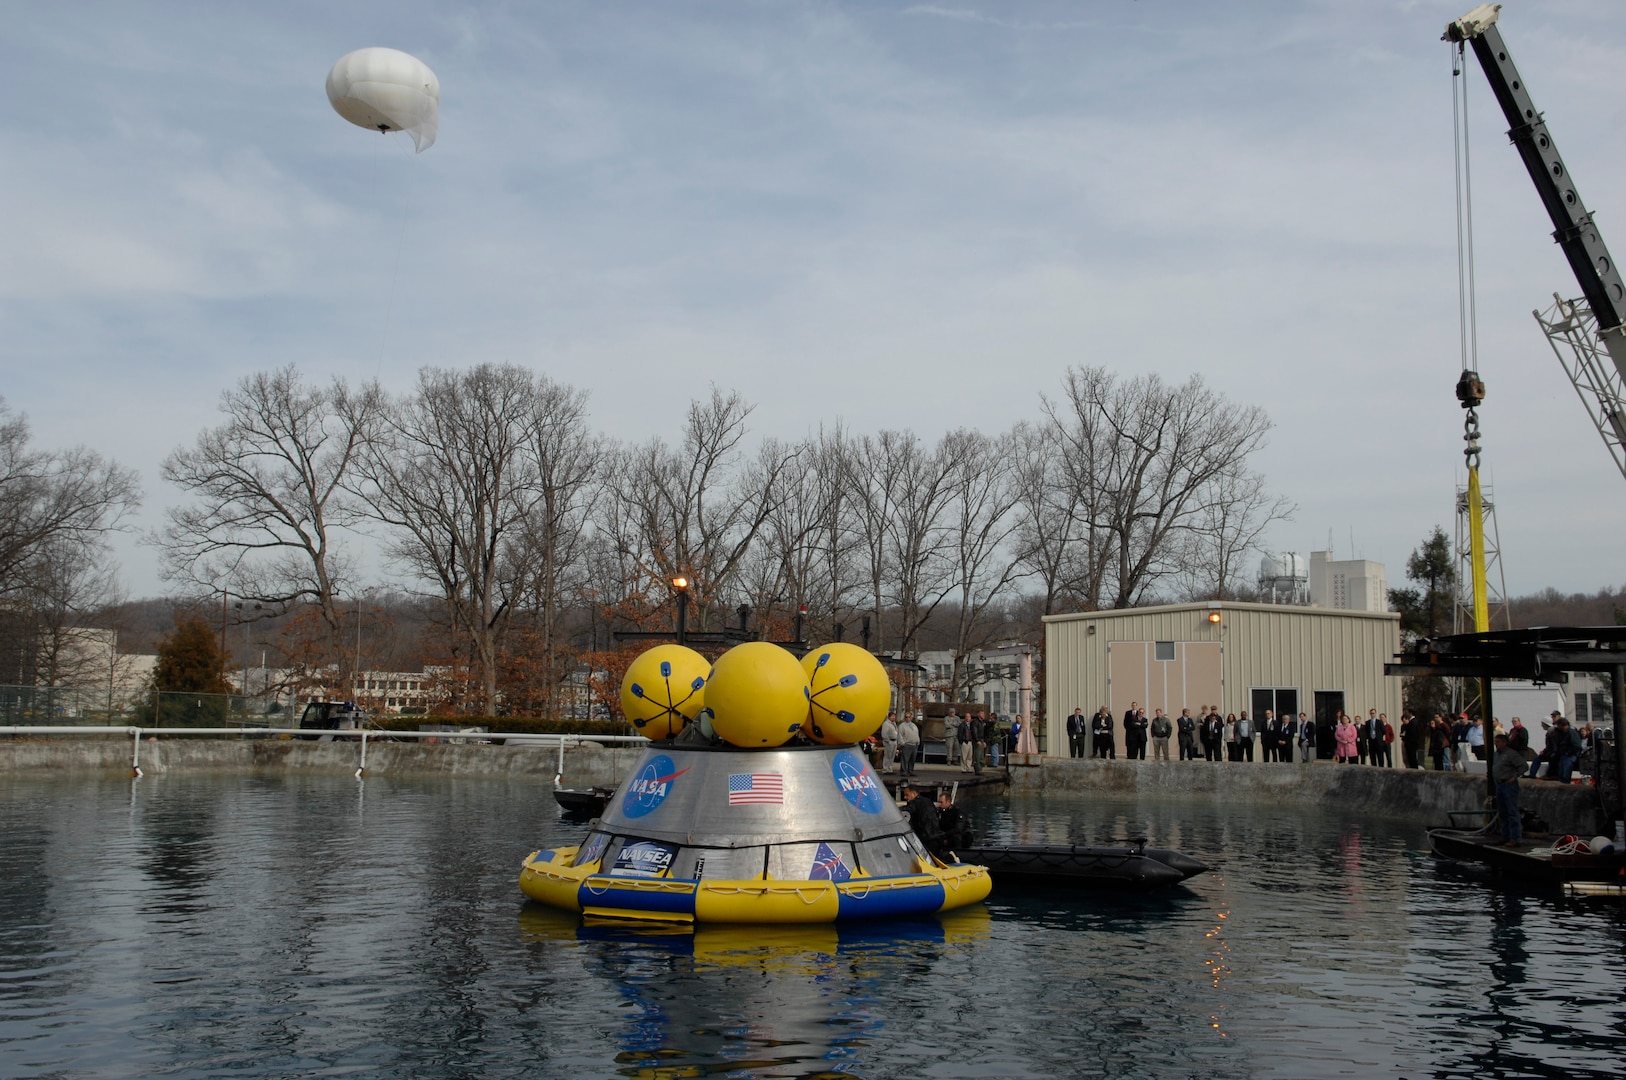 Naval Surface Warfare Center, Carderock Division engineers, along with a NASA test and evaluation team conducted initial post-landing Orion Recovery Test operations, March 23-27, 2009, of a full-scale model of NASA’s Orion space capsule at Carderock’s pentagon-shaped test pond in West Bethesda, Md. The Orion model will be on display in Houston during the week leading up to Super Bowl LI. (U.S. Navy photo by Ryan Hanyok/Released)